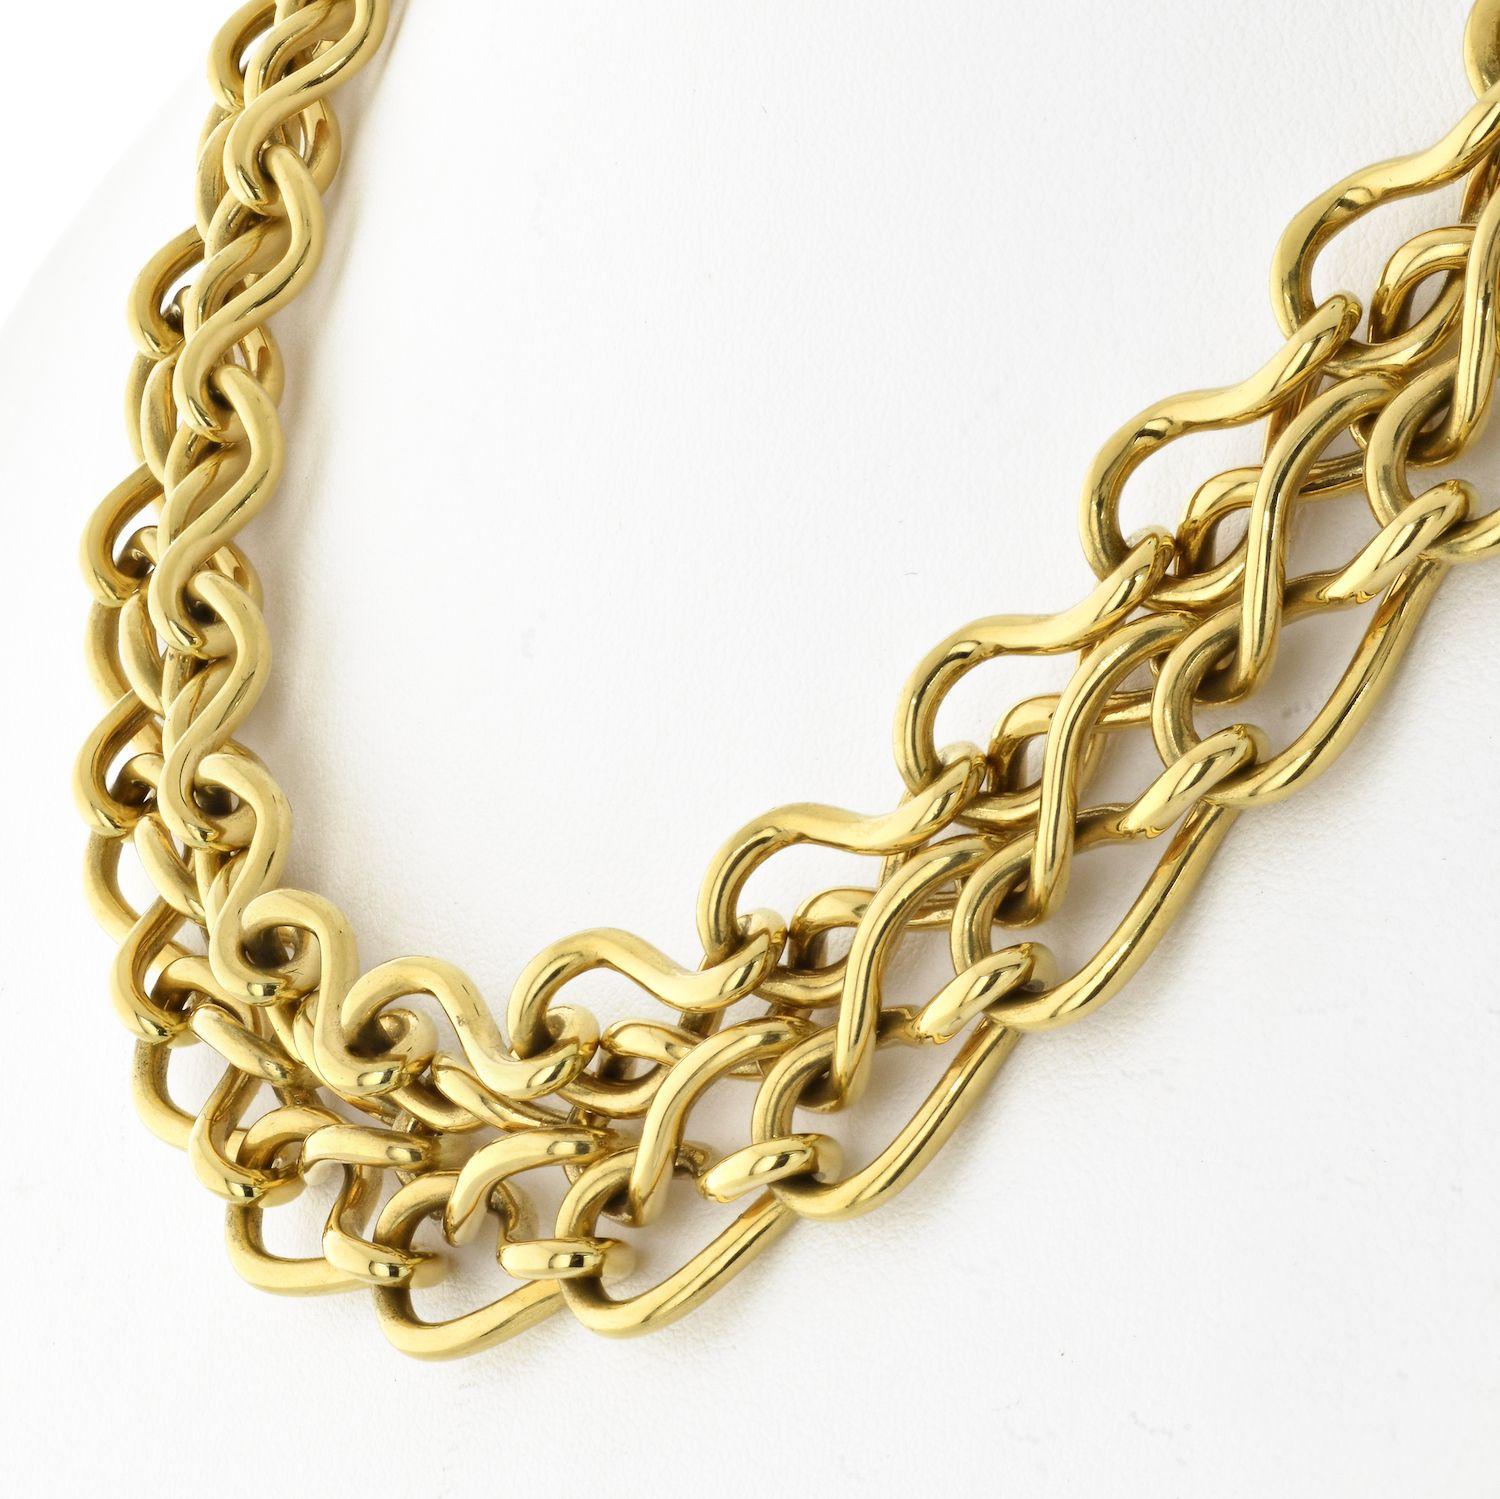 Excellent double row chain collar necklace by Cartier. It is vintage but looks just as new as it looked 30 years ago. Crafted in solid 18K Yellow Gold. Polished finish. 
Secure locking mechanism. Signed with French markes and jeweler's mark, as well